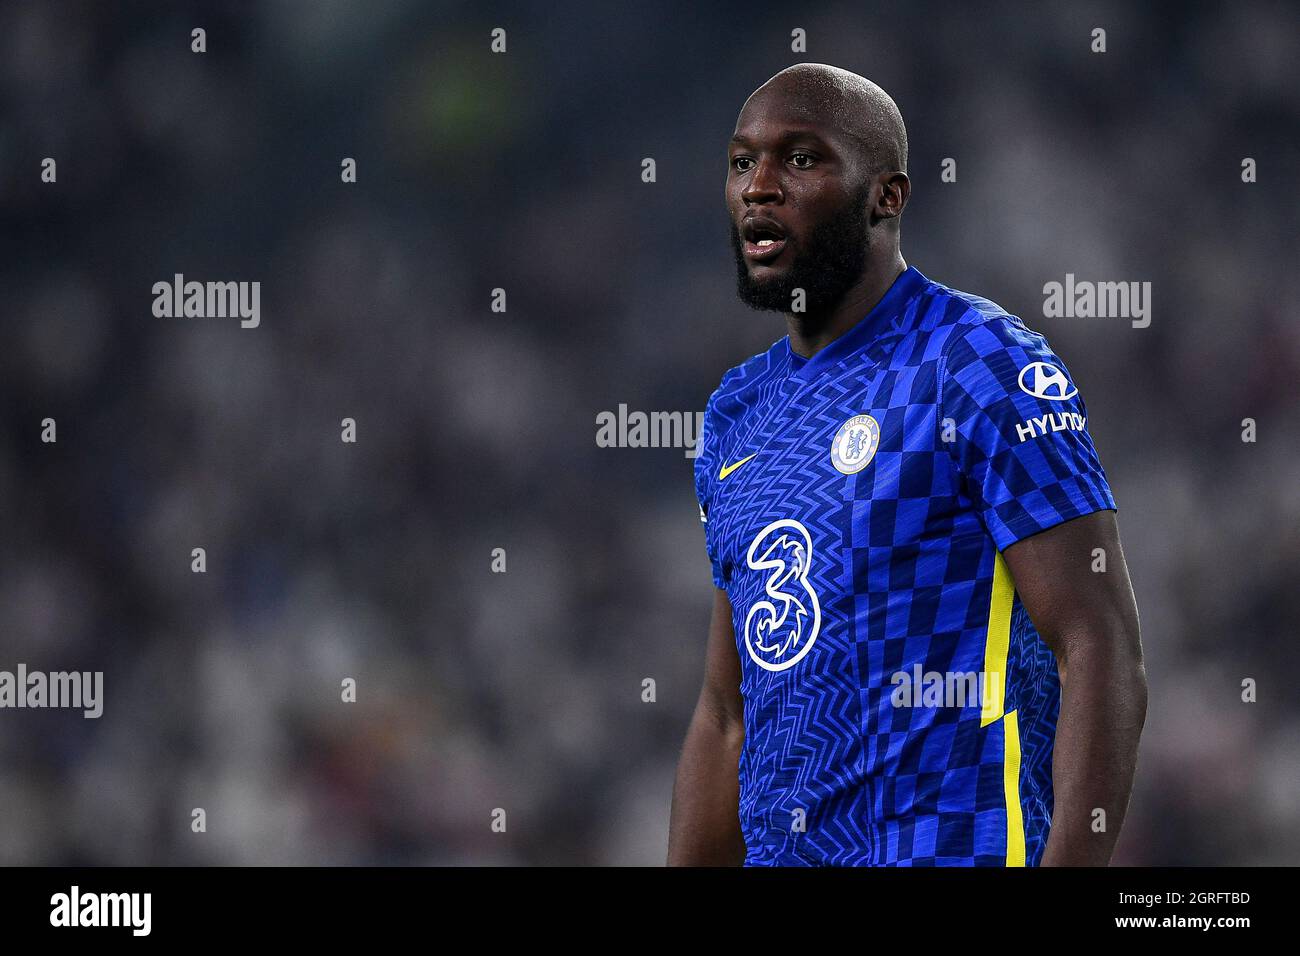 Turin, Italy. 29 September 2021. Romelu Lukaku of Chelsea FC looks on during the UEFA Champions League football match between Juventus FC and Chelsea FC. Credit: Nicolò Campo/Alamy Live News Stock Photo